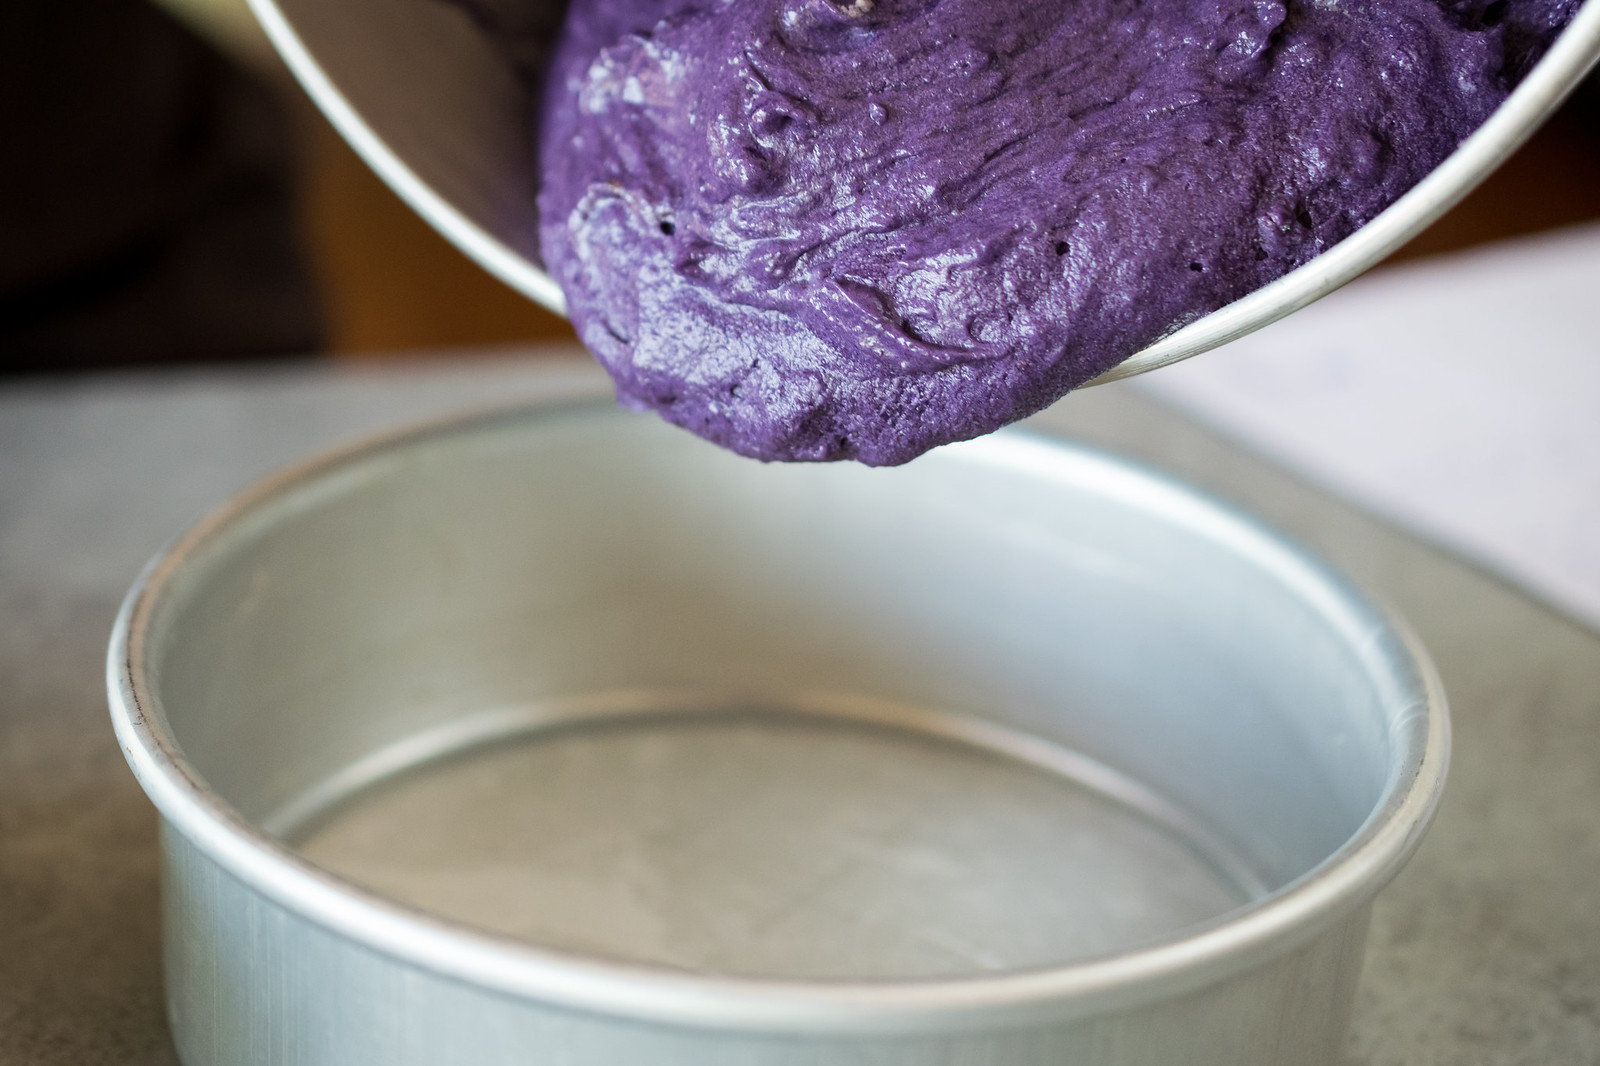 pouring the purple cake batter into the pan